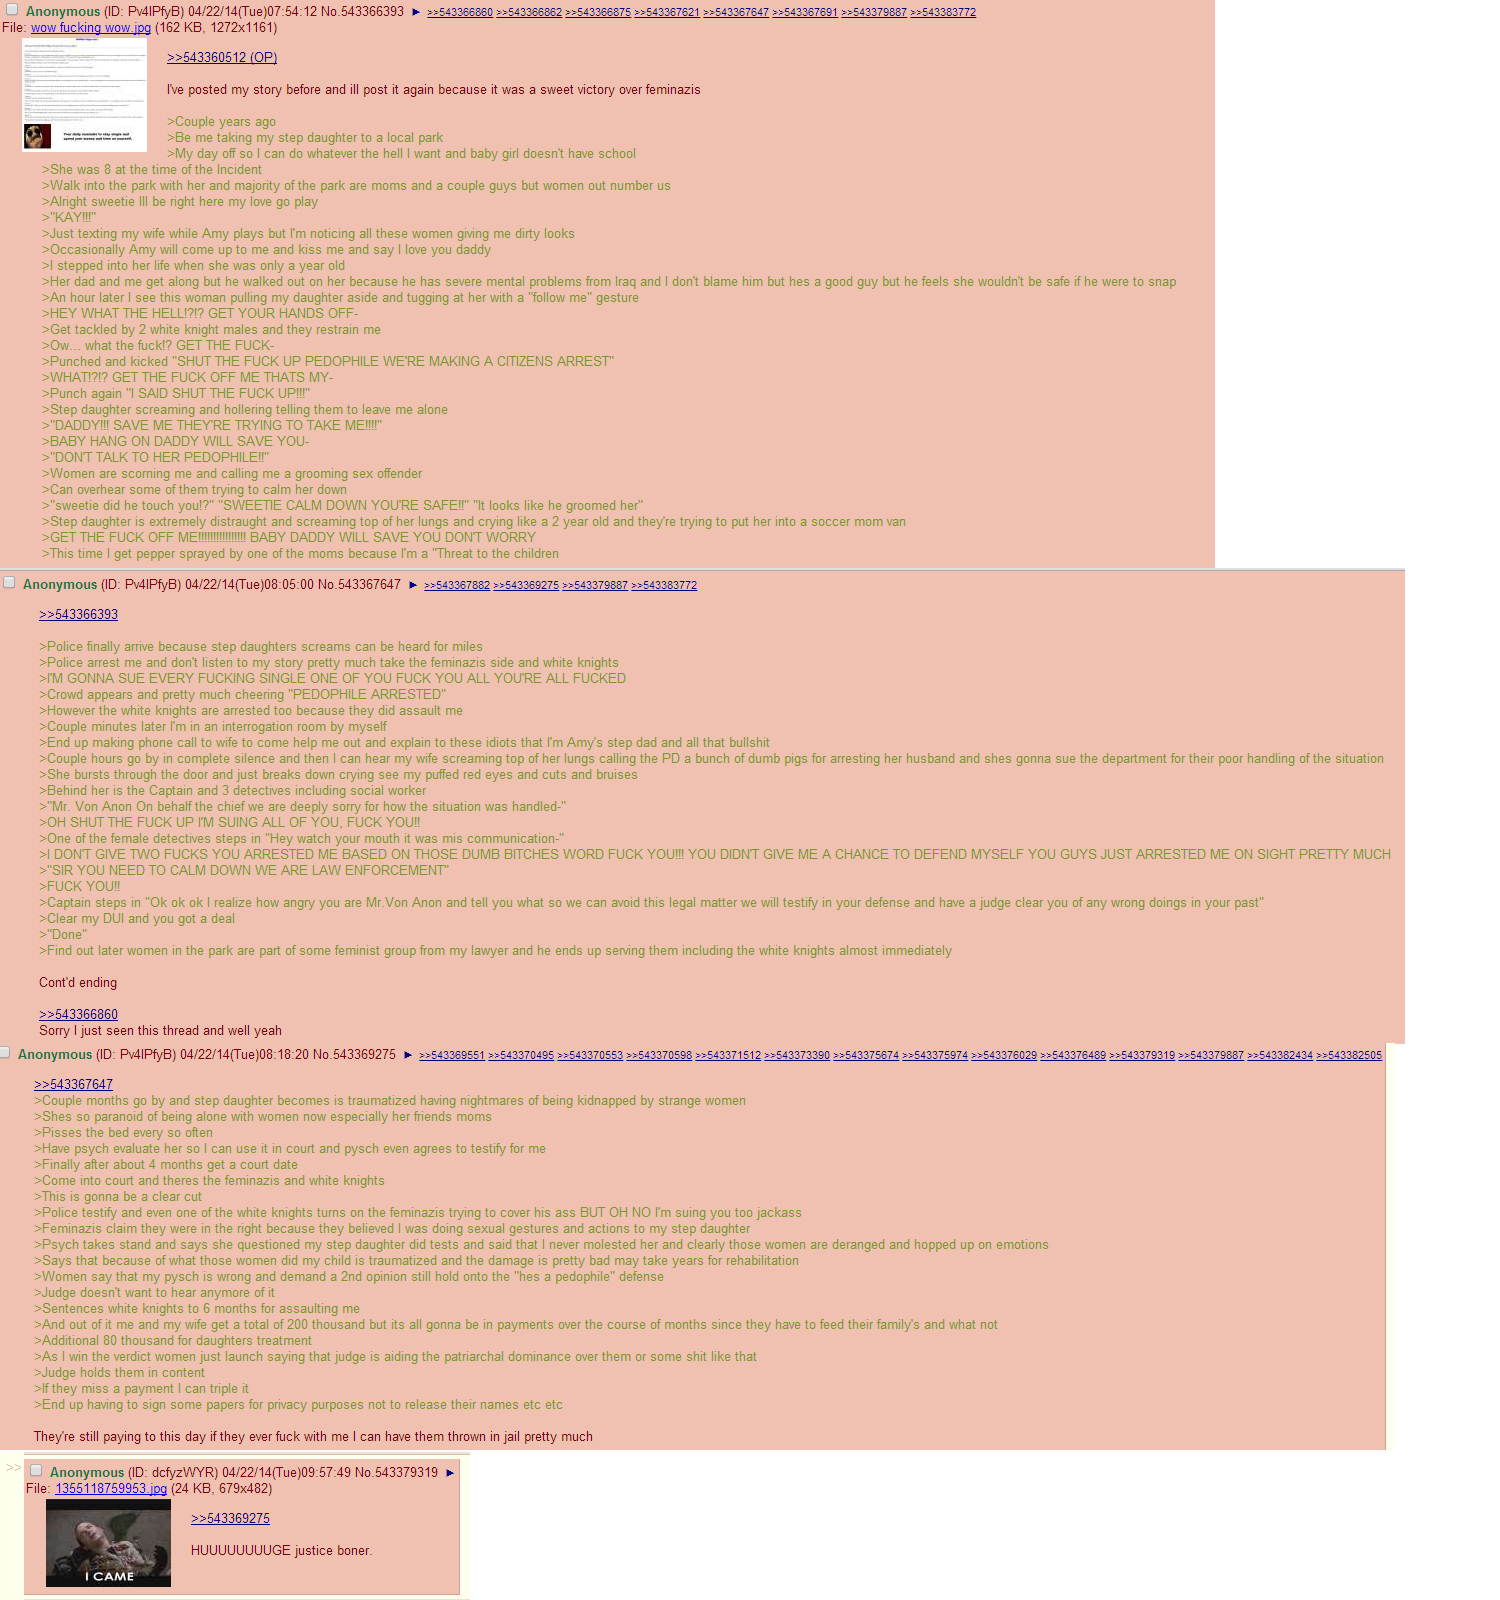 theres a rip tumblr thread on 4chan so here you go